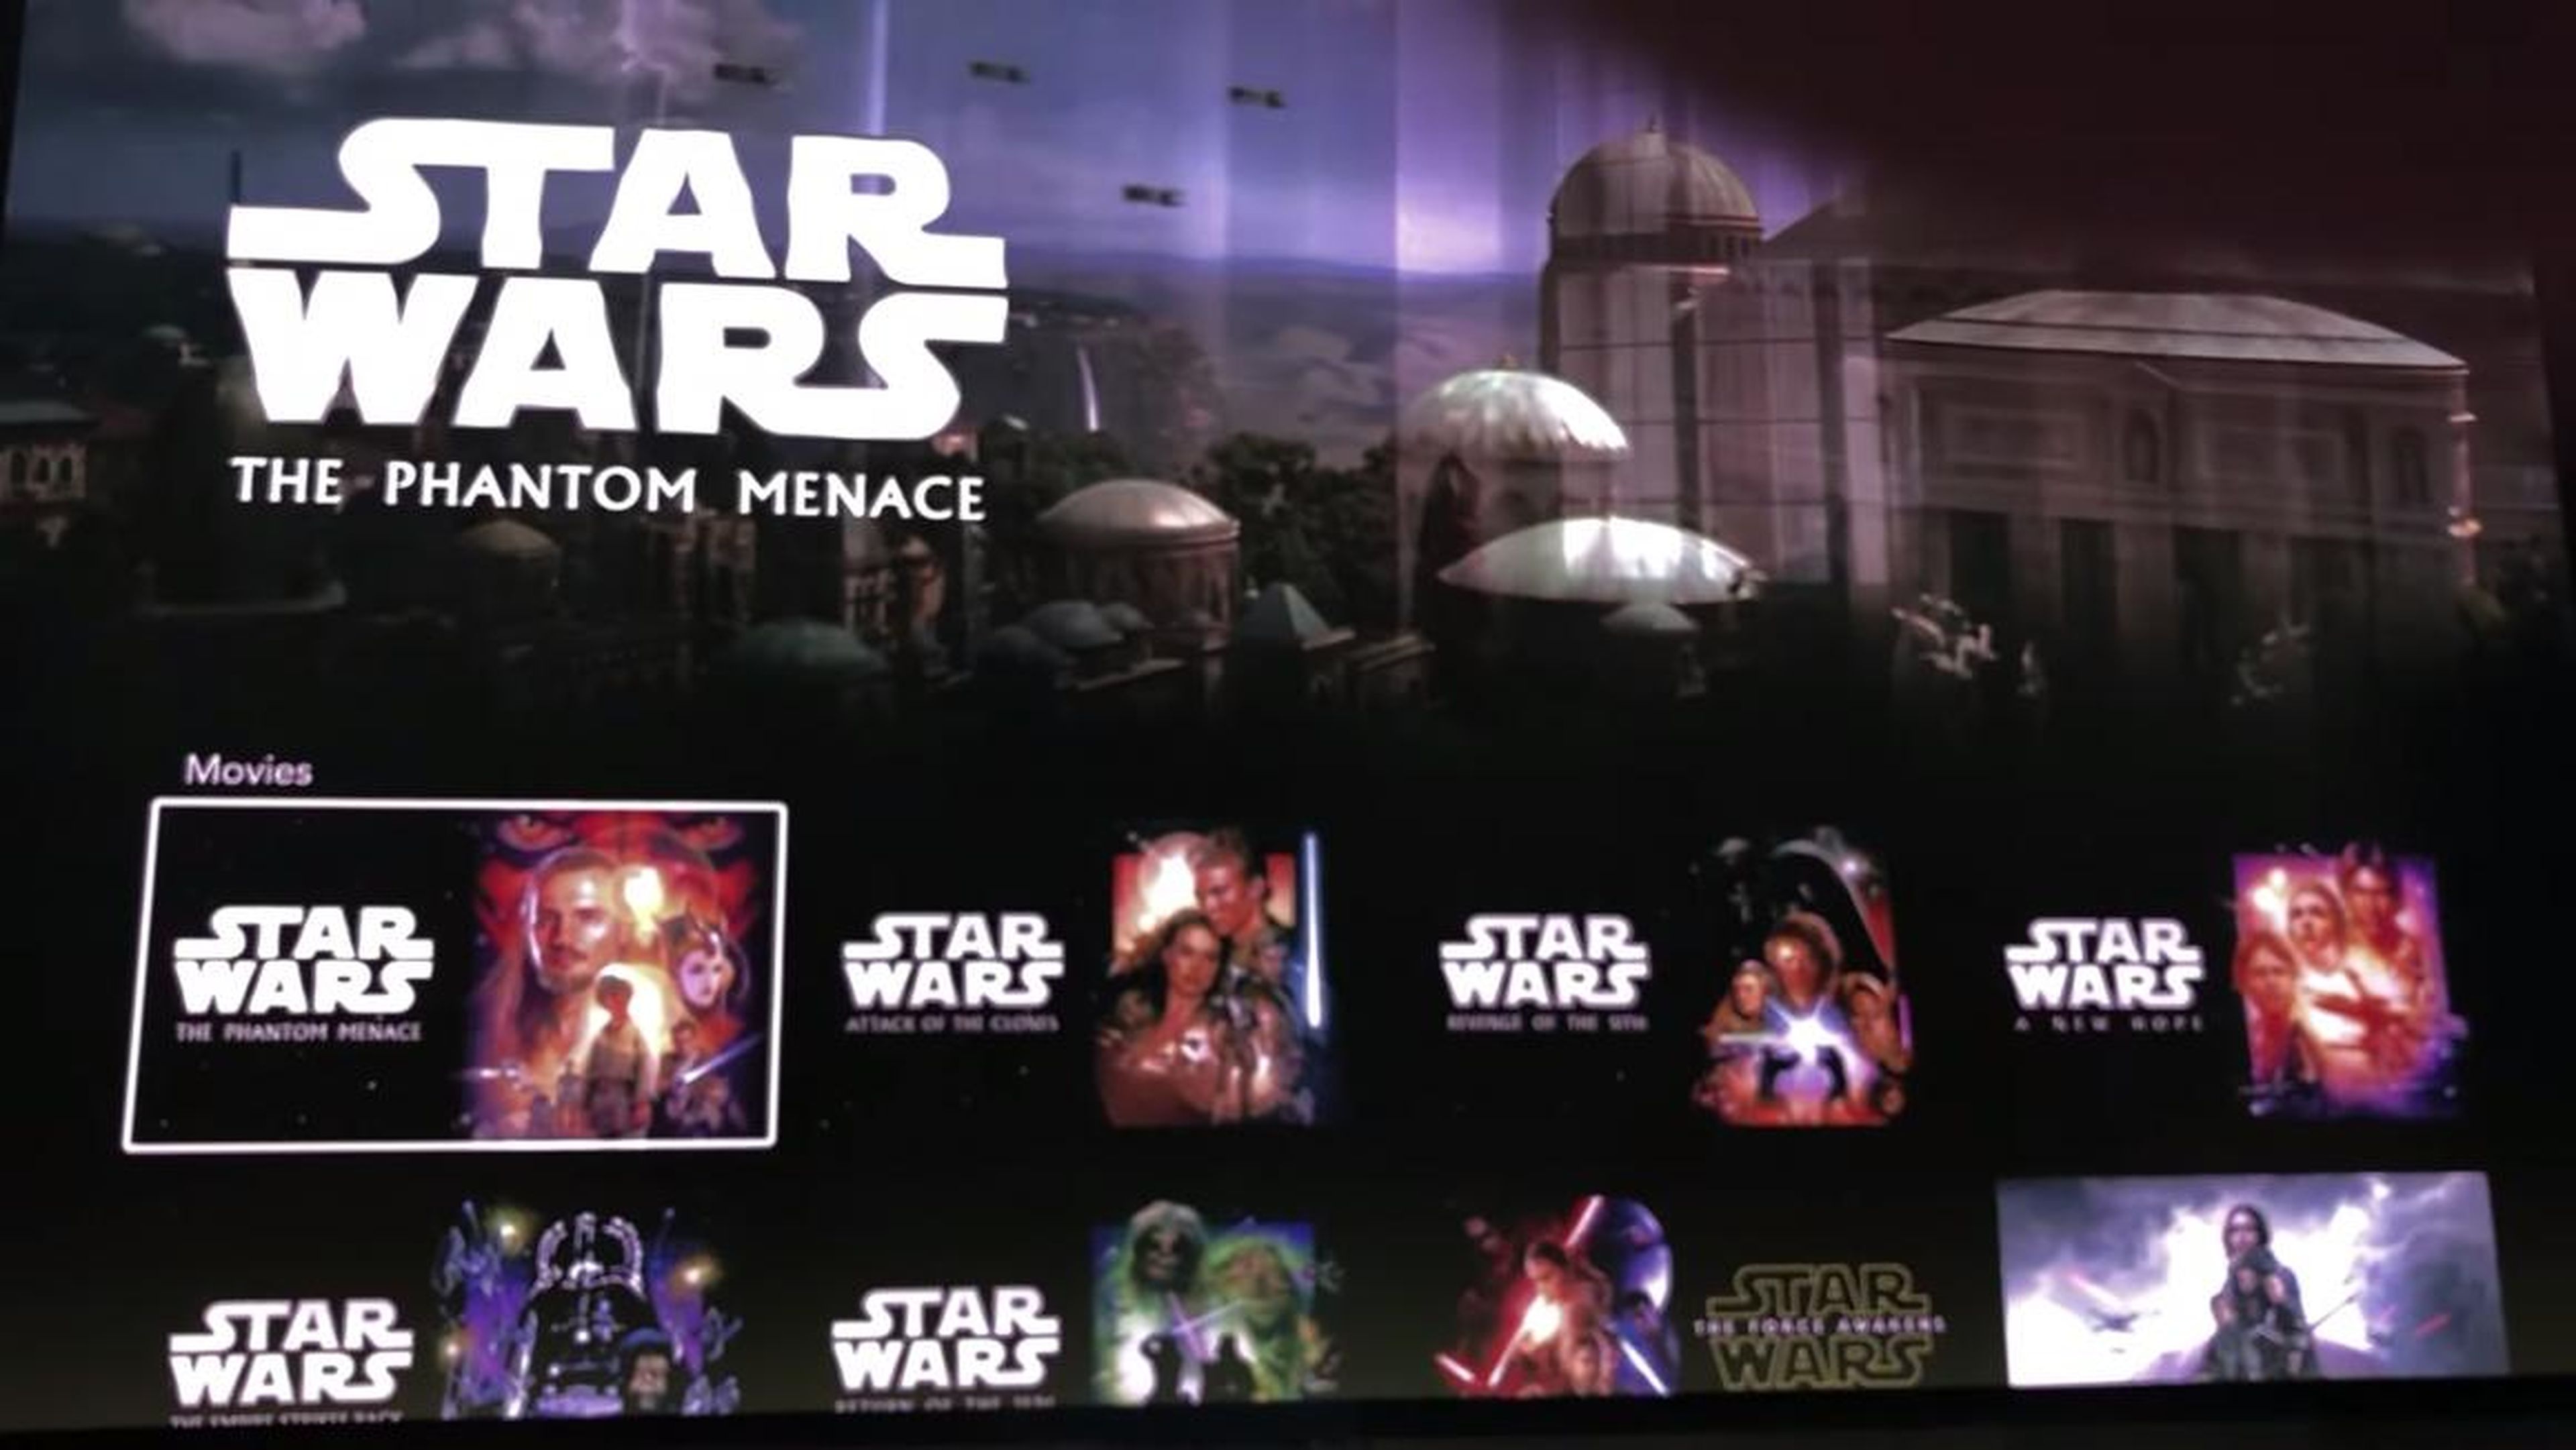 Disney has the full rights to "Star Wars," so the company will feature every film in the main series, in order, right in the app. You can also watch any of the movie spin-offs or TV shows there, too.